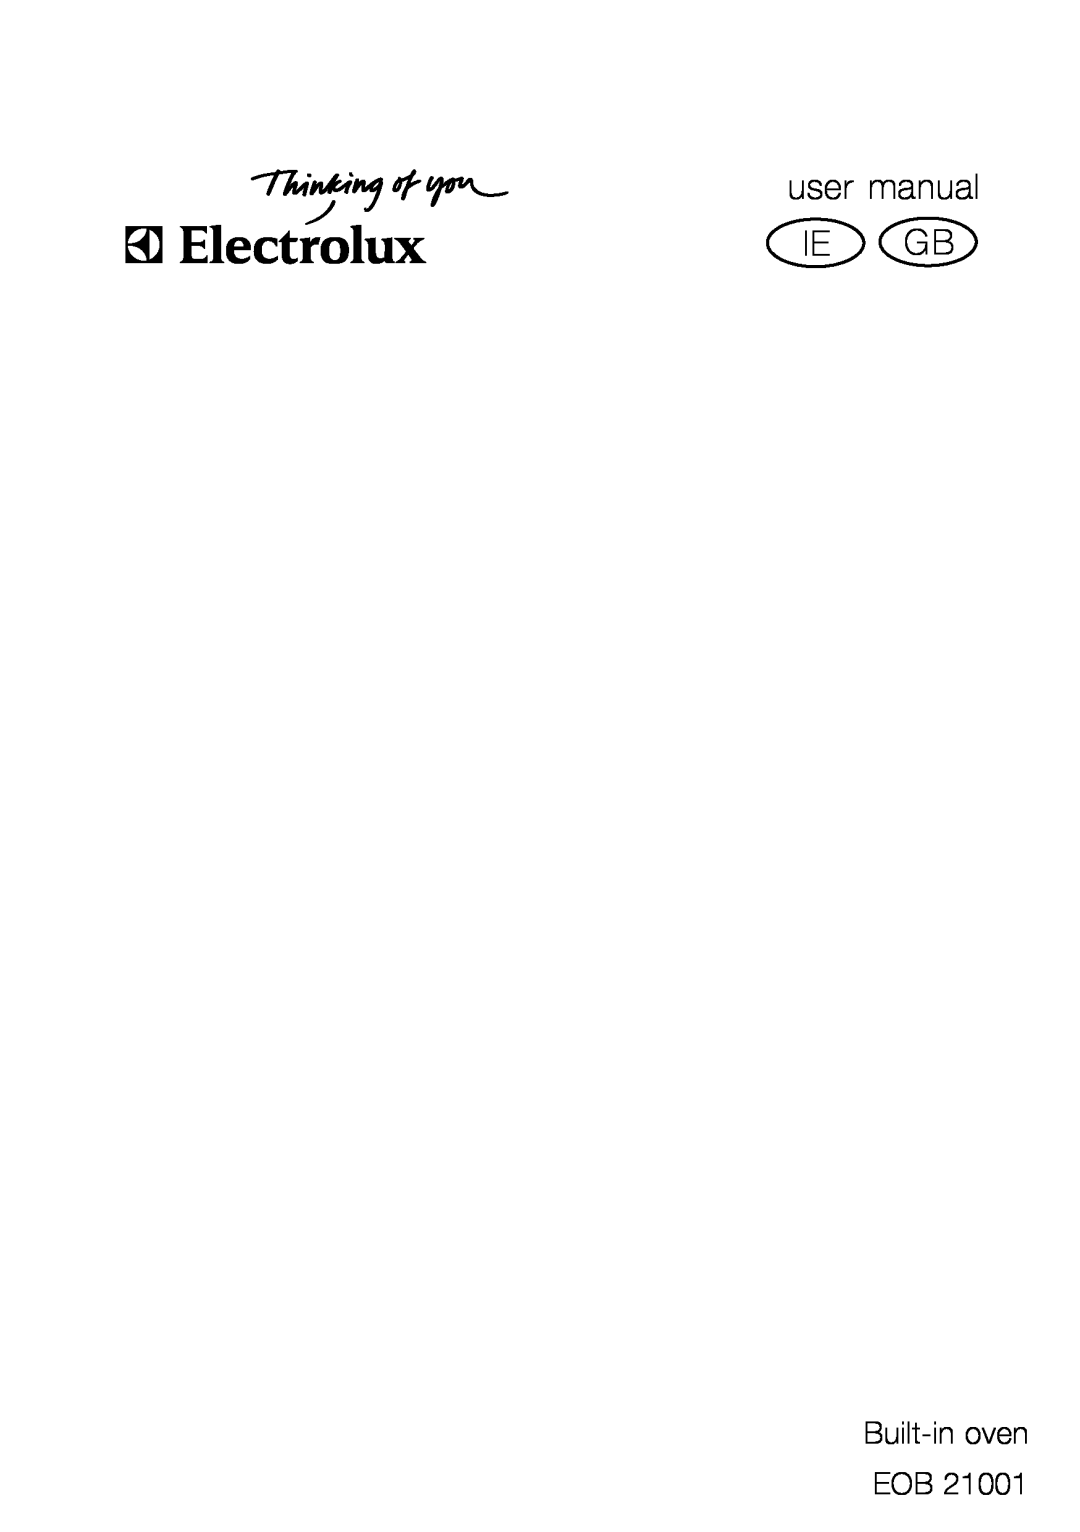 Electrolux EOB 21001 user manual user manual IE GB, Built-in oven EOB 